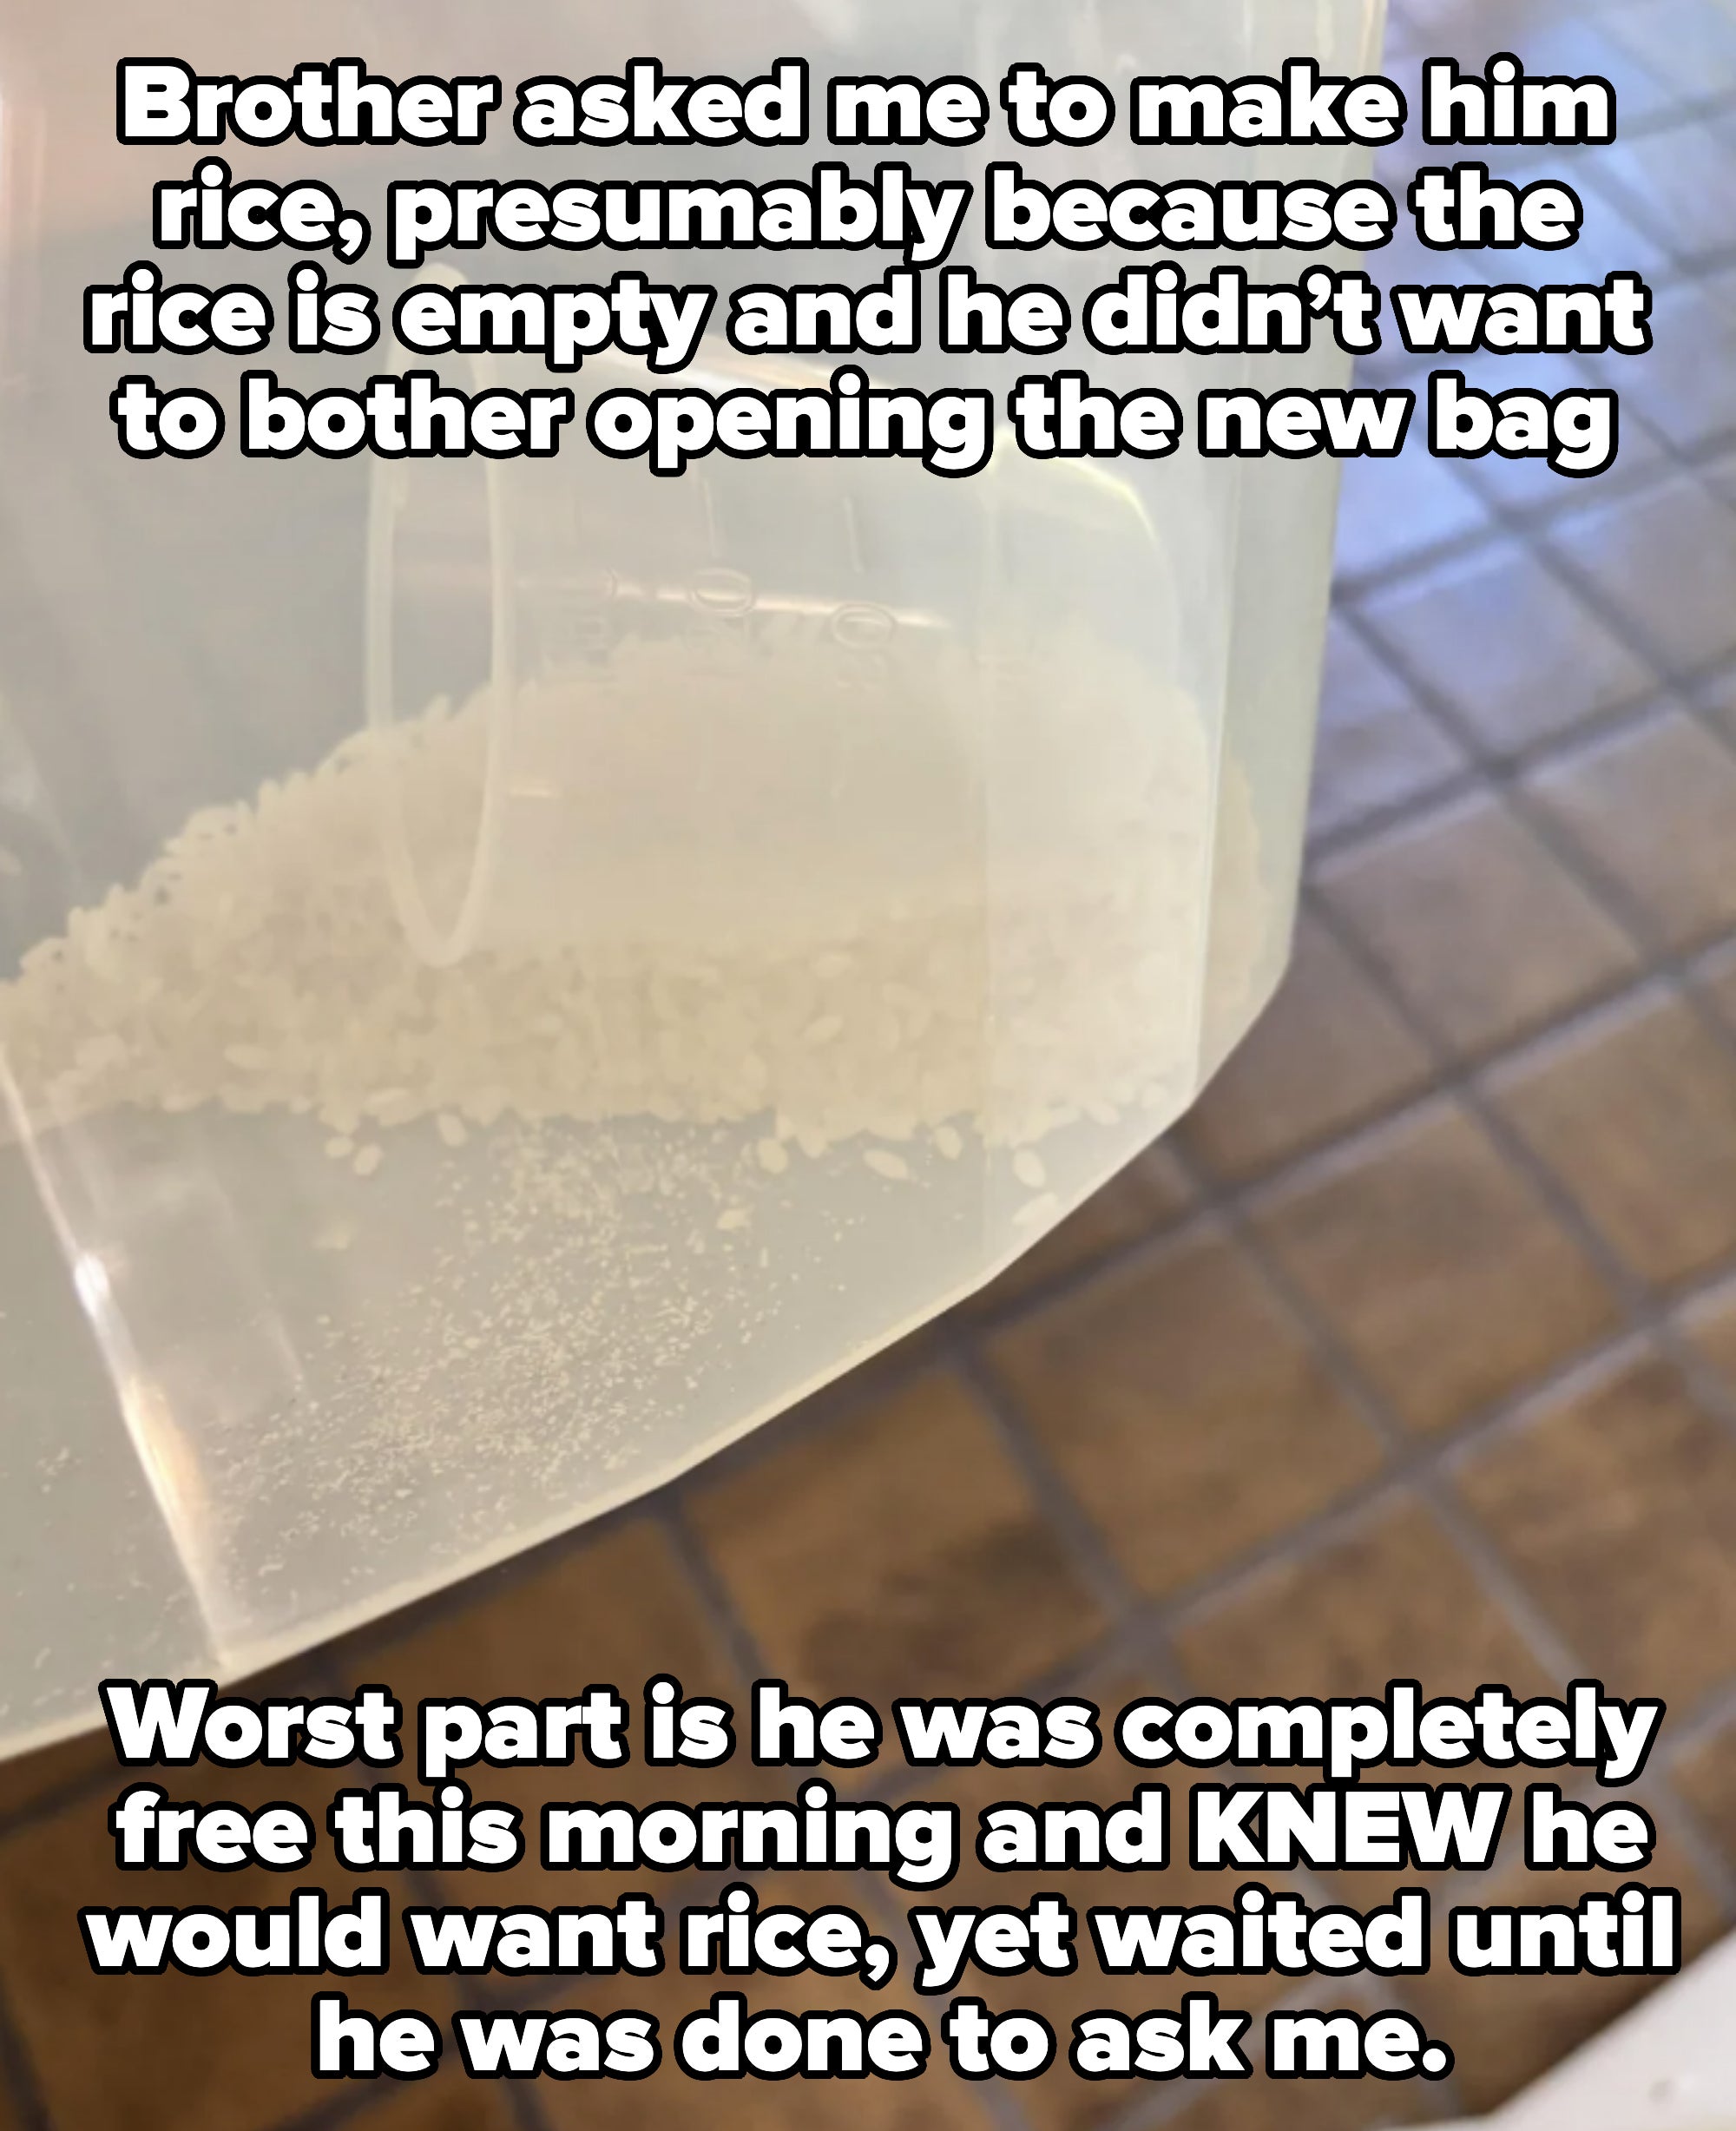 A plastic measuring cup inside a plastic container is partially filled with white rice on a tiled surface